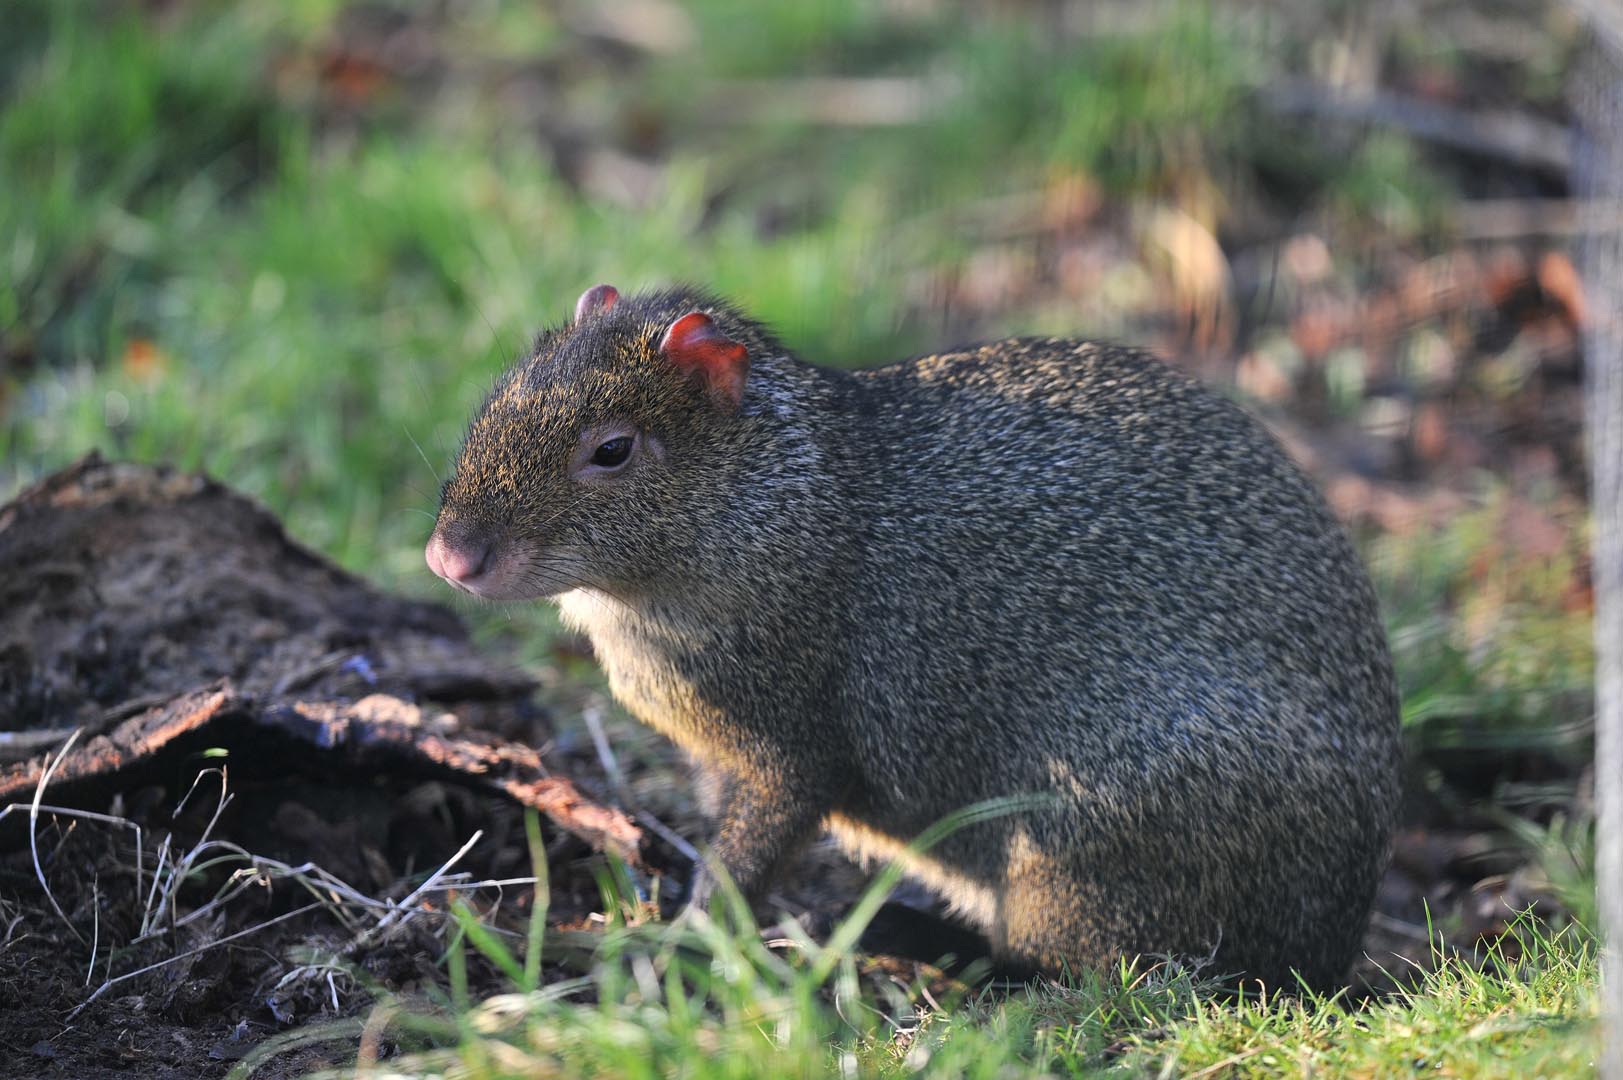 Azara's agouti looking to the left IMAGE: Declan Duffy (2015)